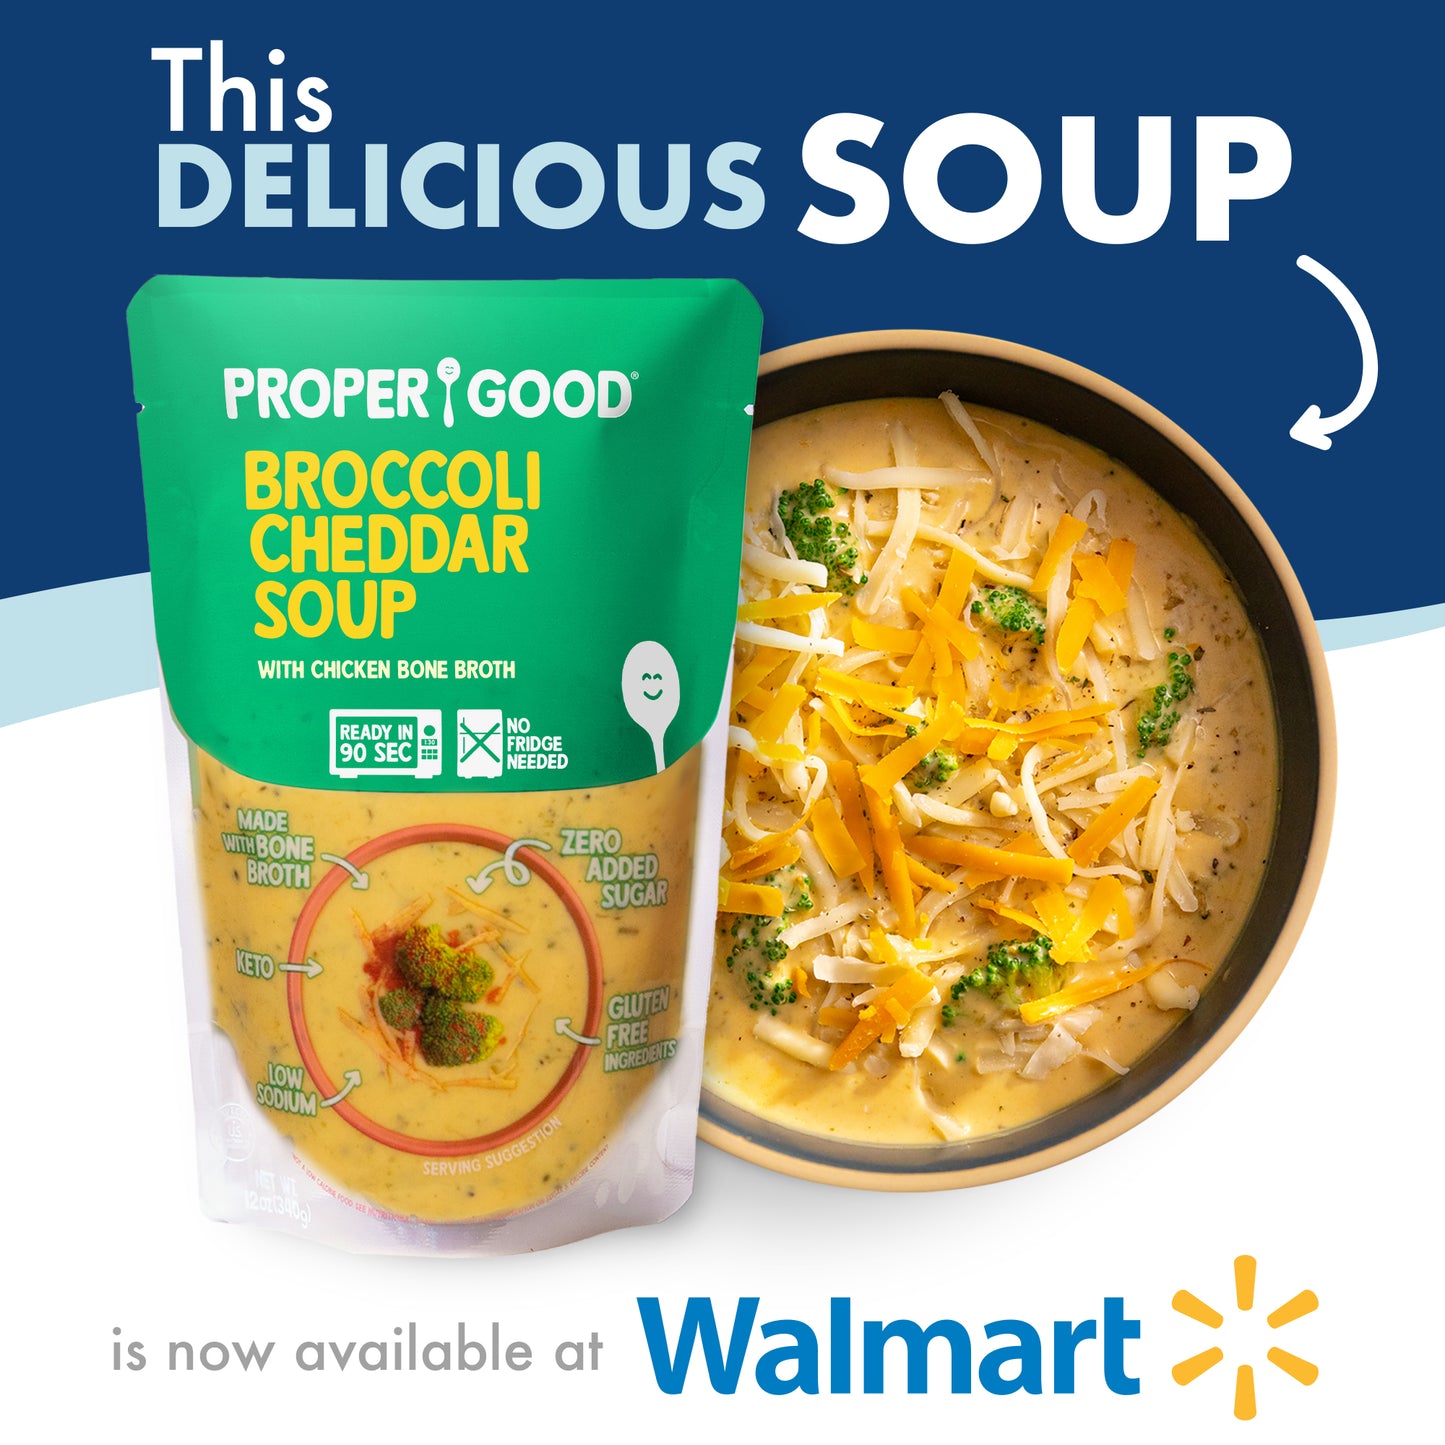 Broccoli Cheddar Soup now available in Walmart - Eat Proper Good